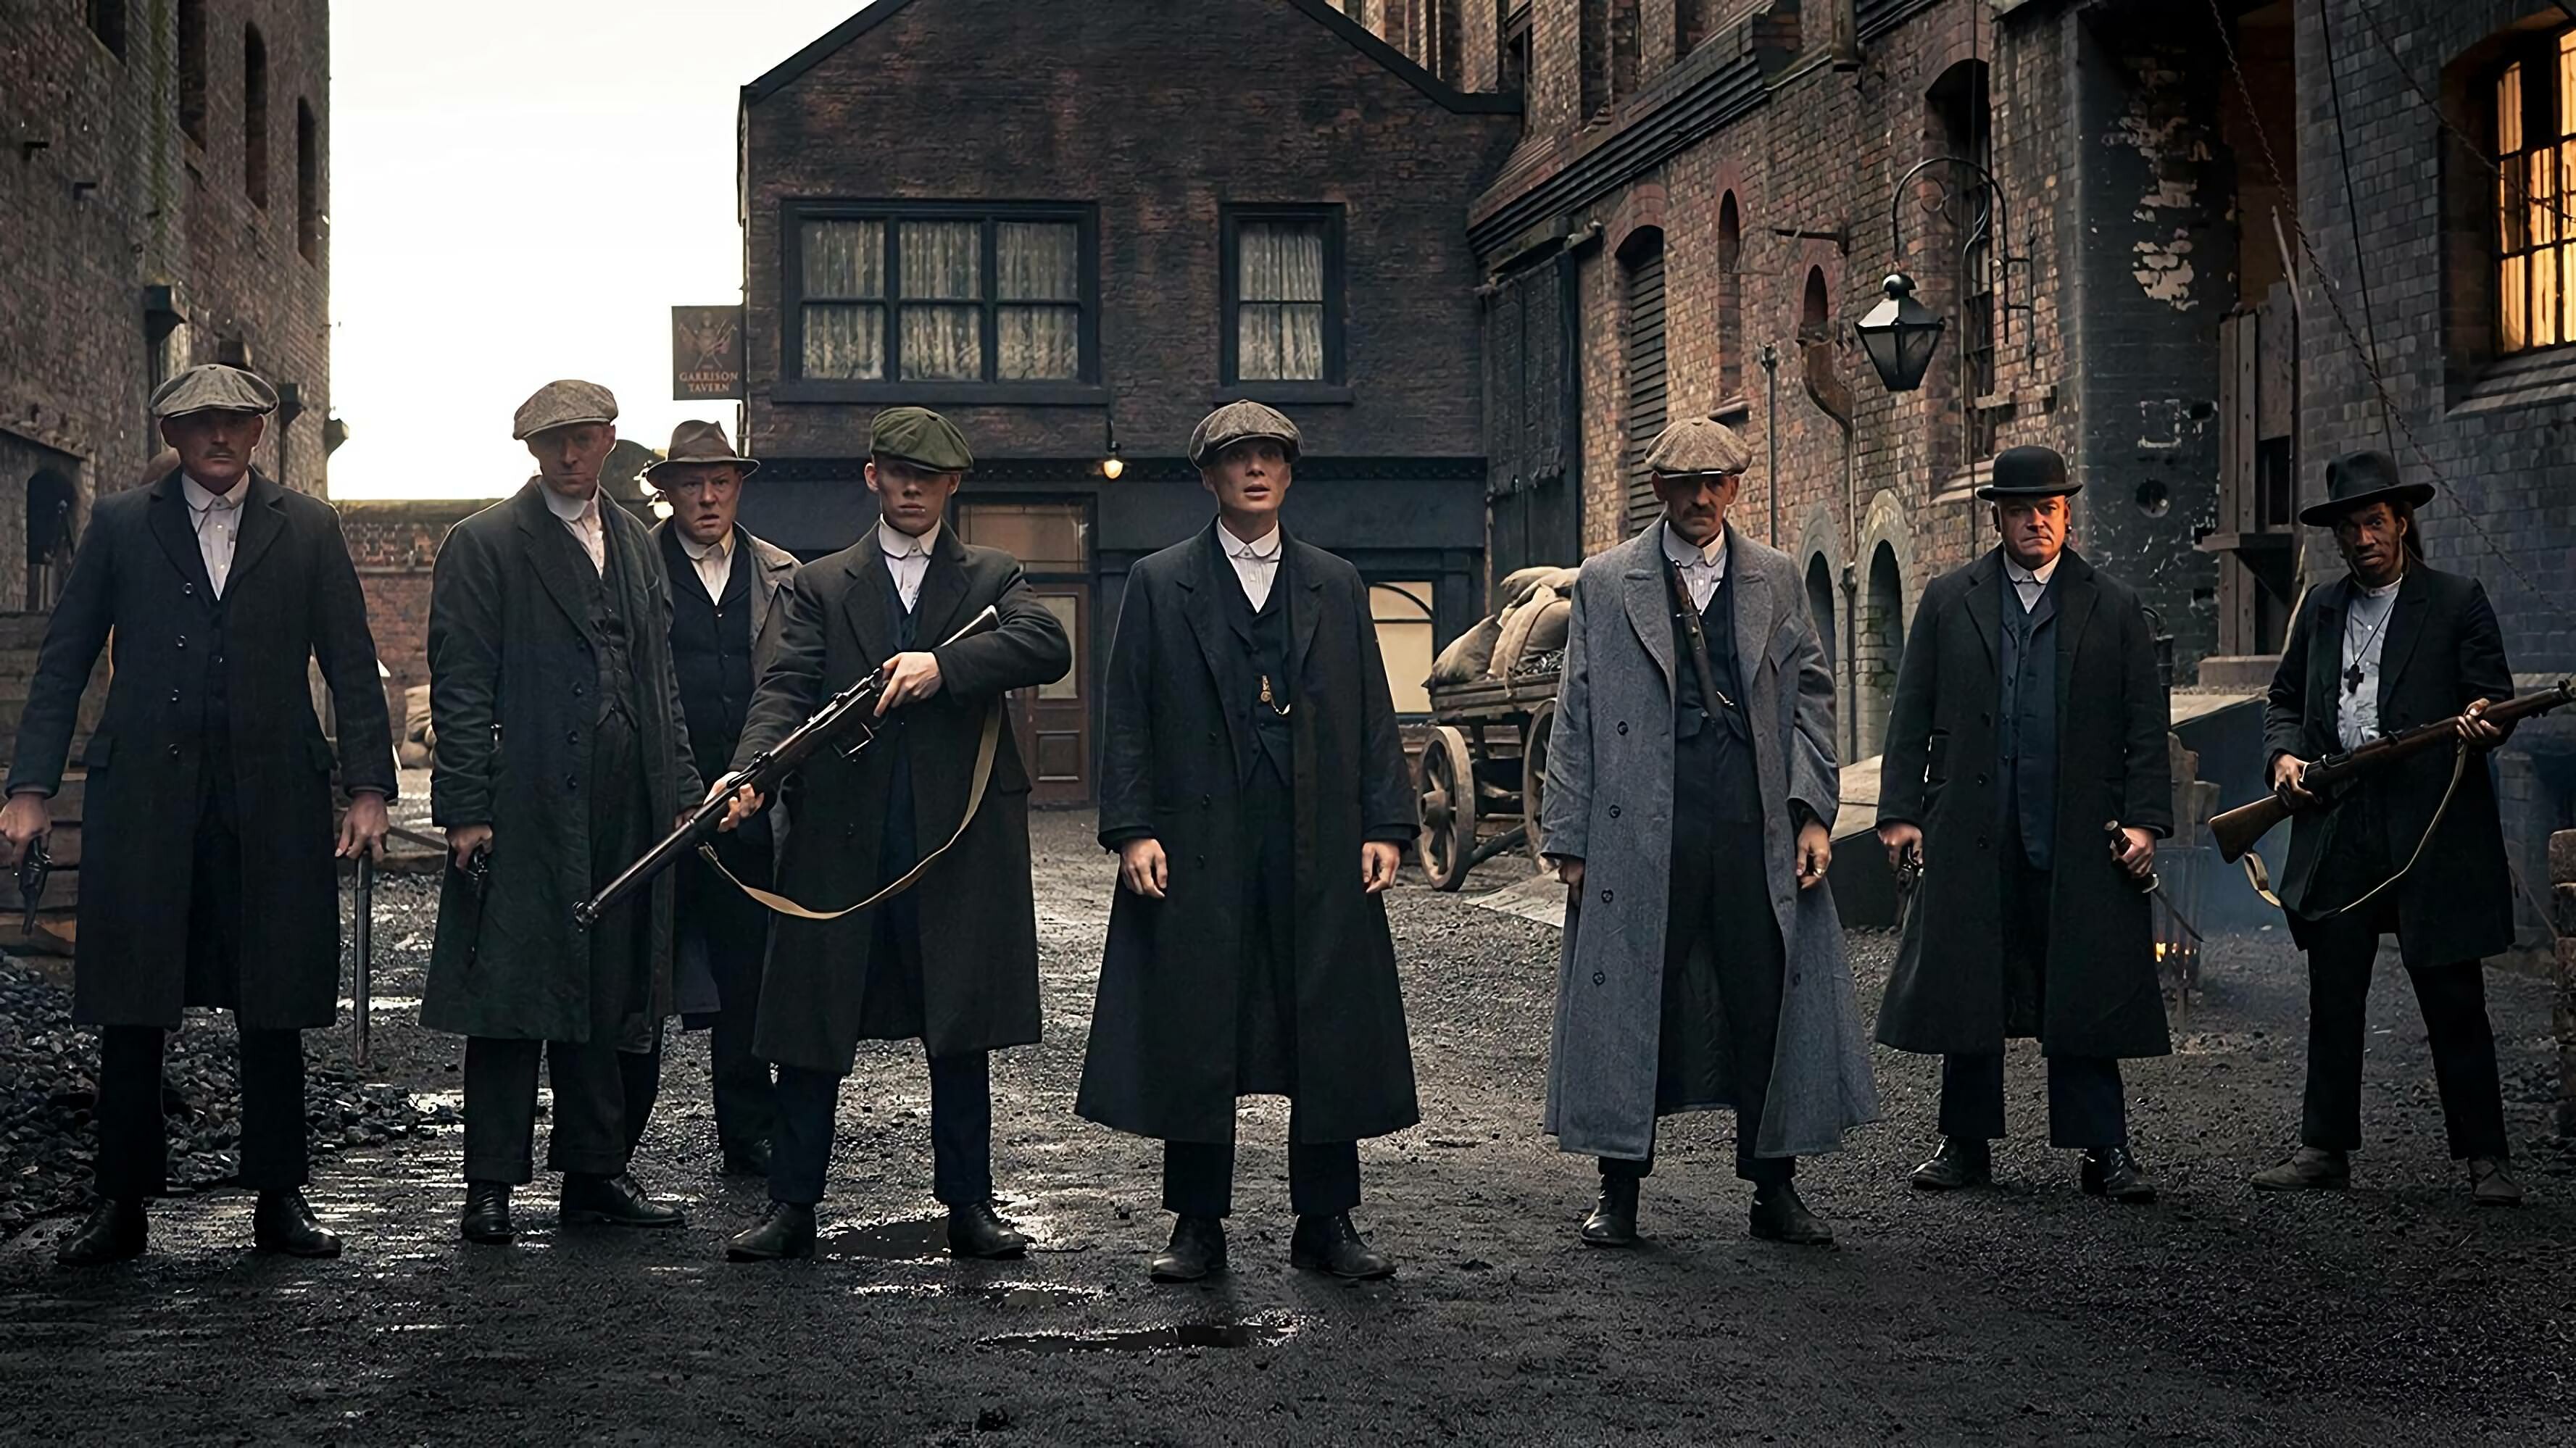 Peaky Blinders, Ultra HD background, Party theme, Authentic atmosphere, 3560x2000 HD Desktop